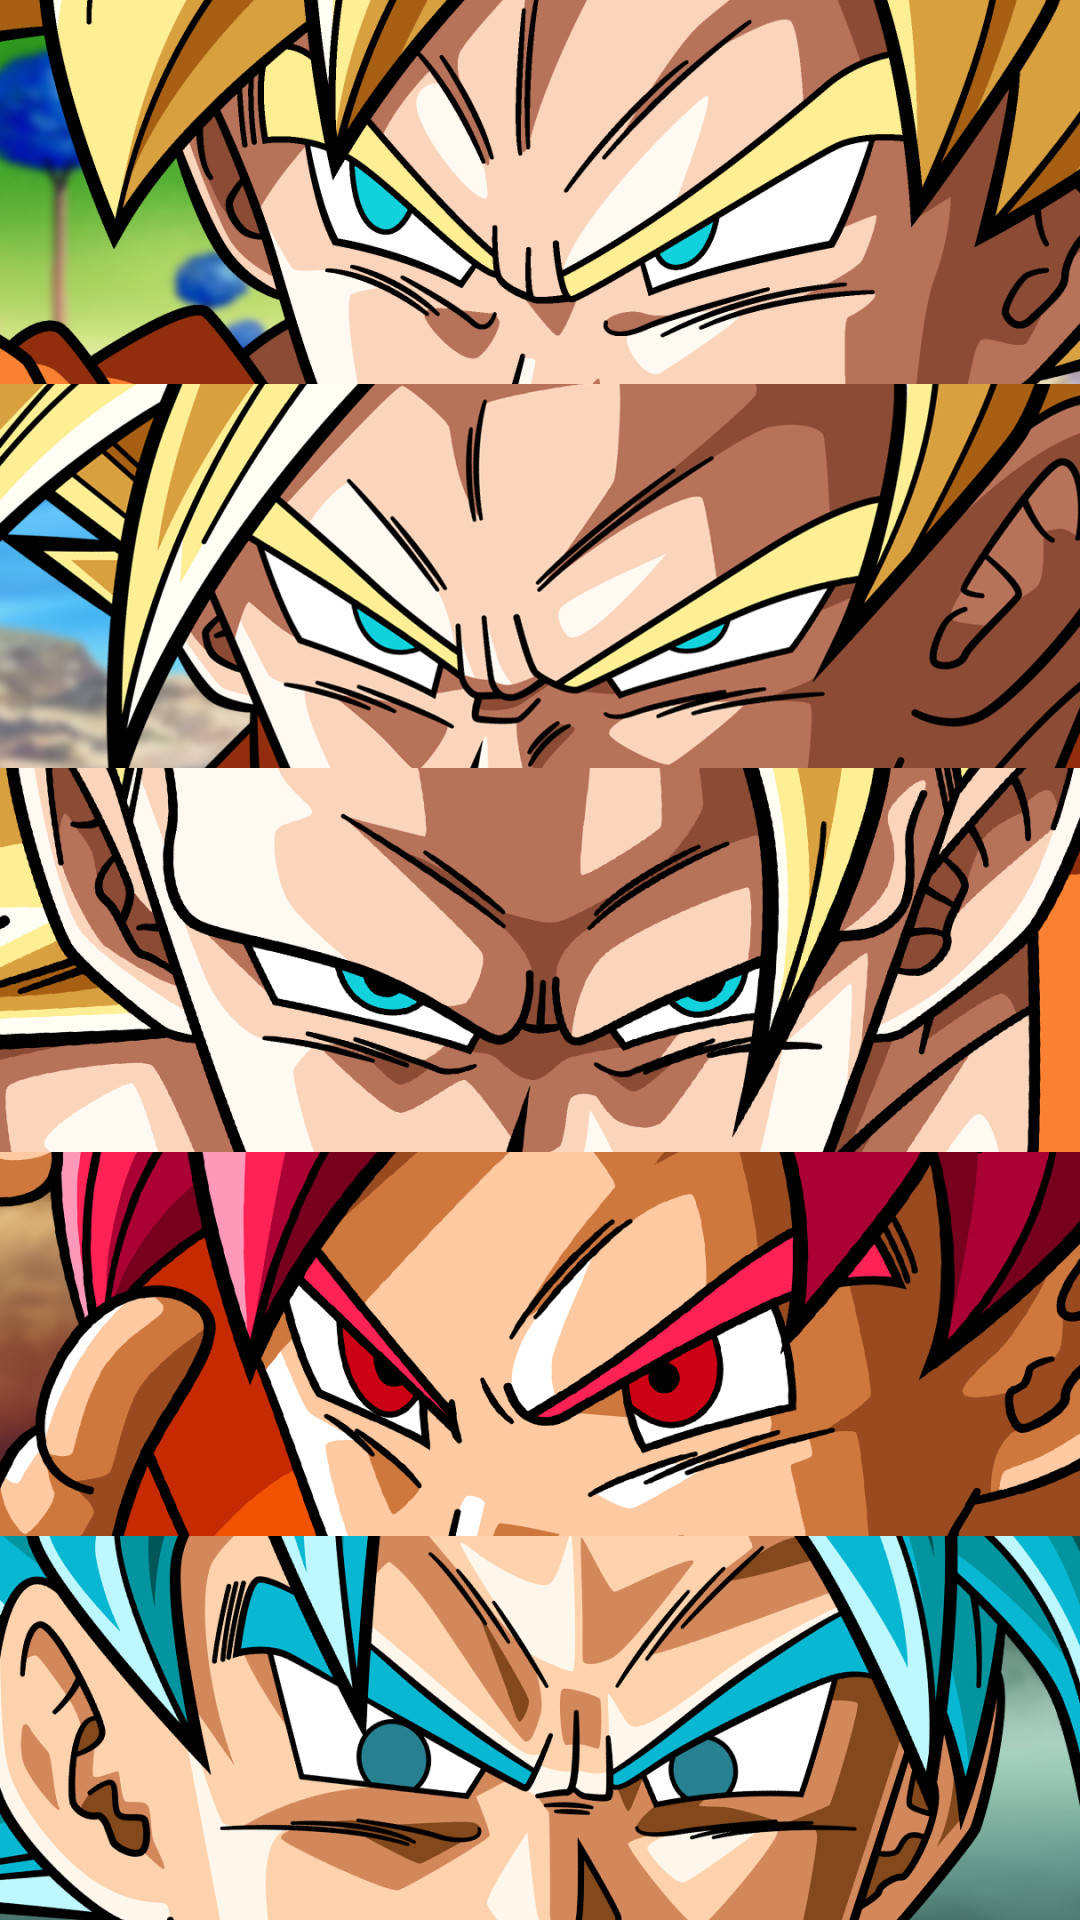 100+] Dragon Ball Z Iphone Backgrounds